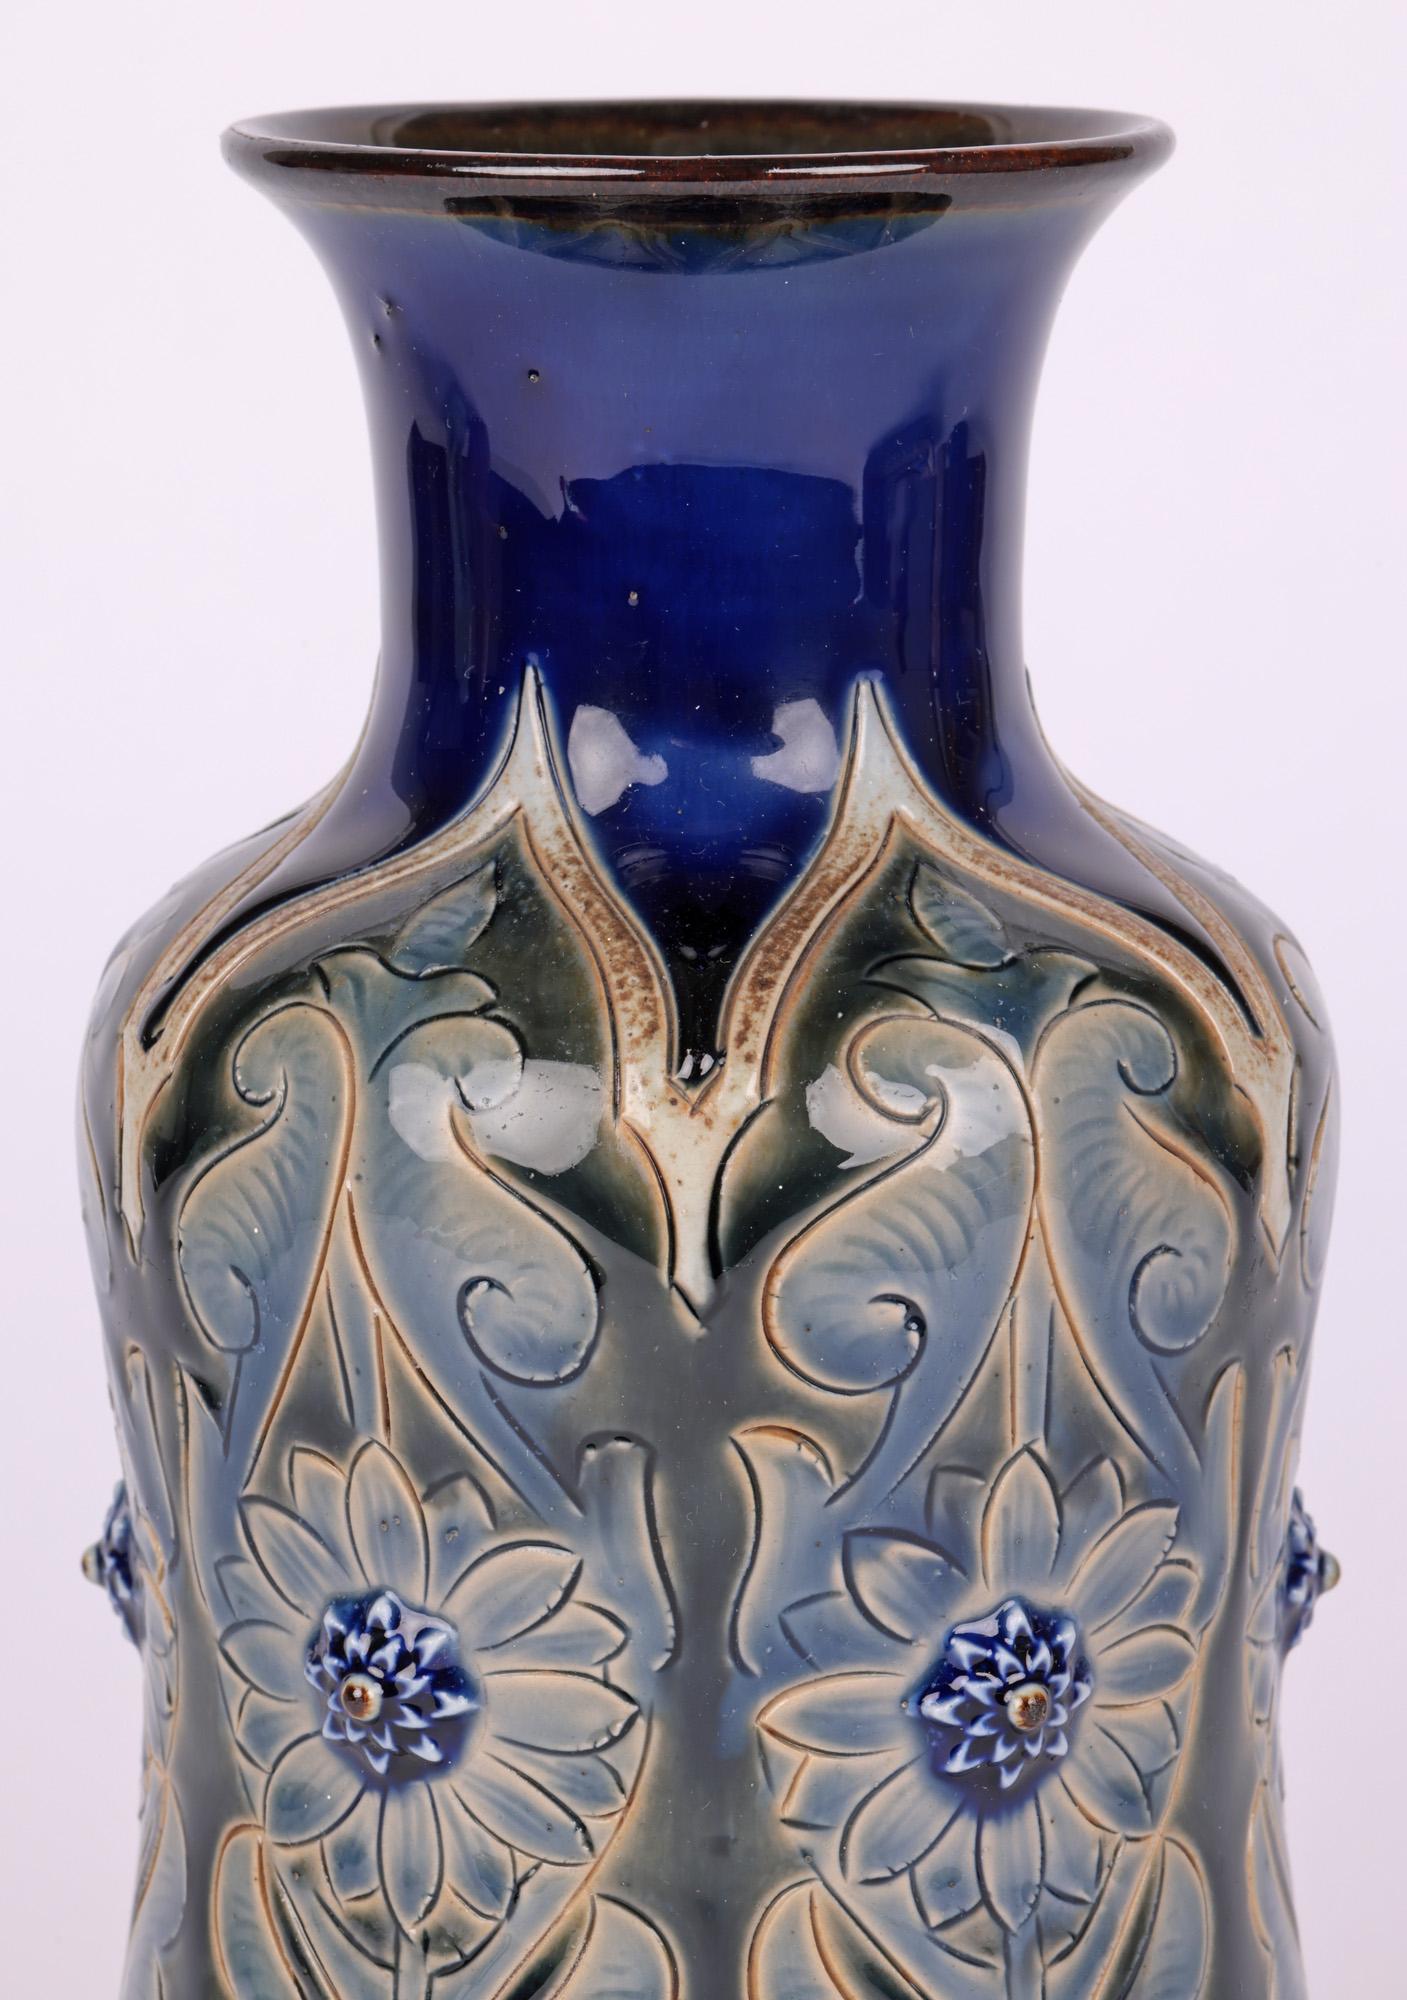 A stunning Doulton Lambeth Aesthetic Movement vase decorated with stylised floral and leaf designs by renowned artists Edward Dunn and Rosina Brown and dated 1884. The stoneware vase stands on a narrow round unglazed foot with slightly recessed base